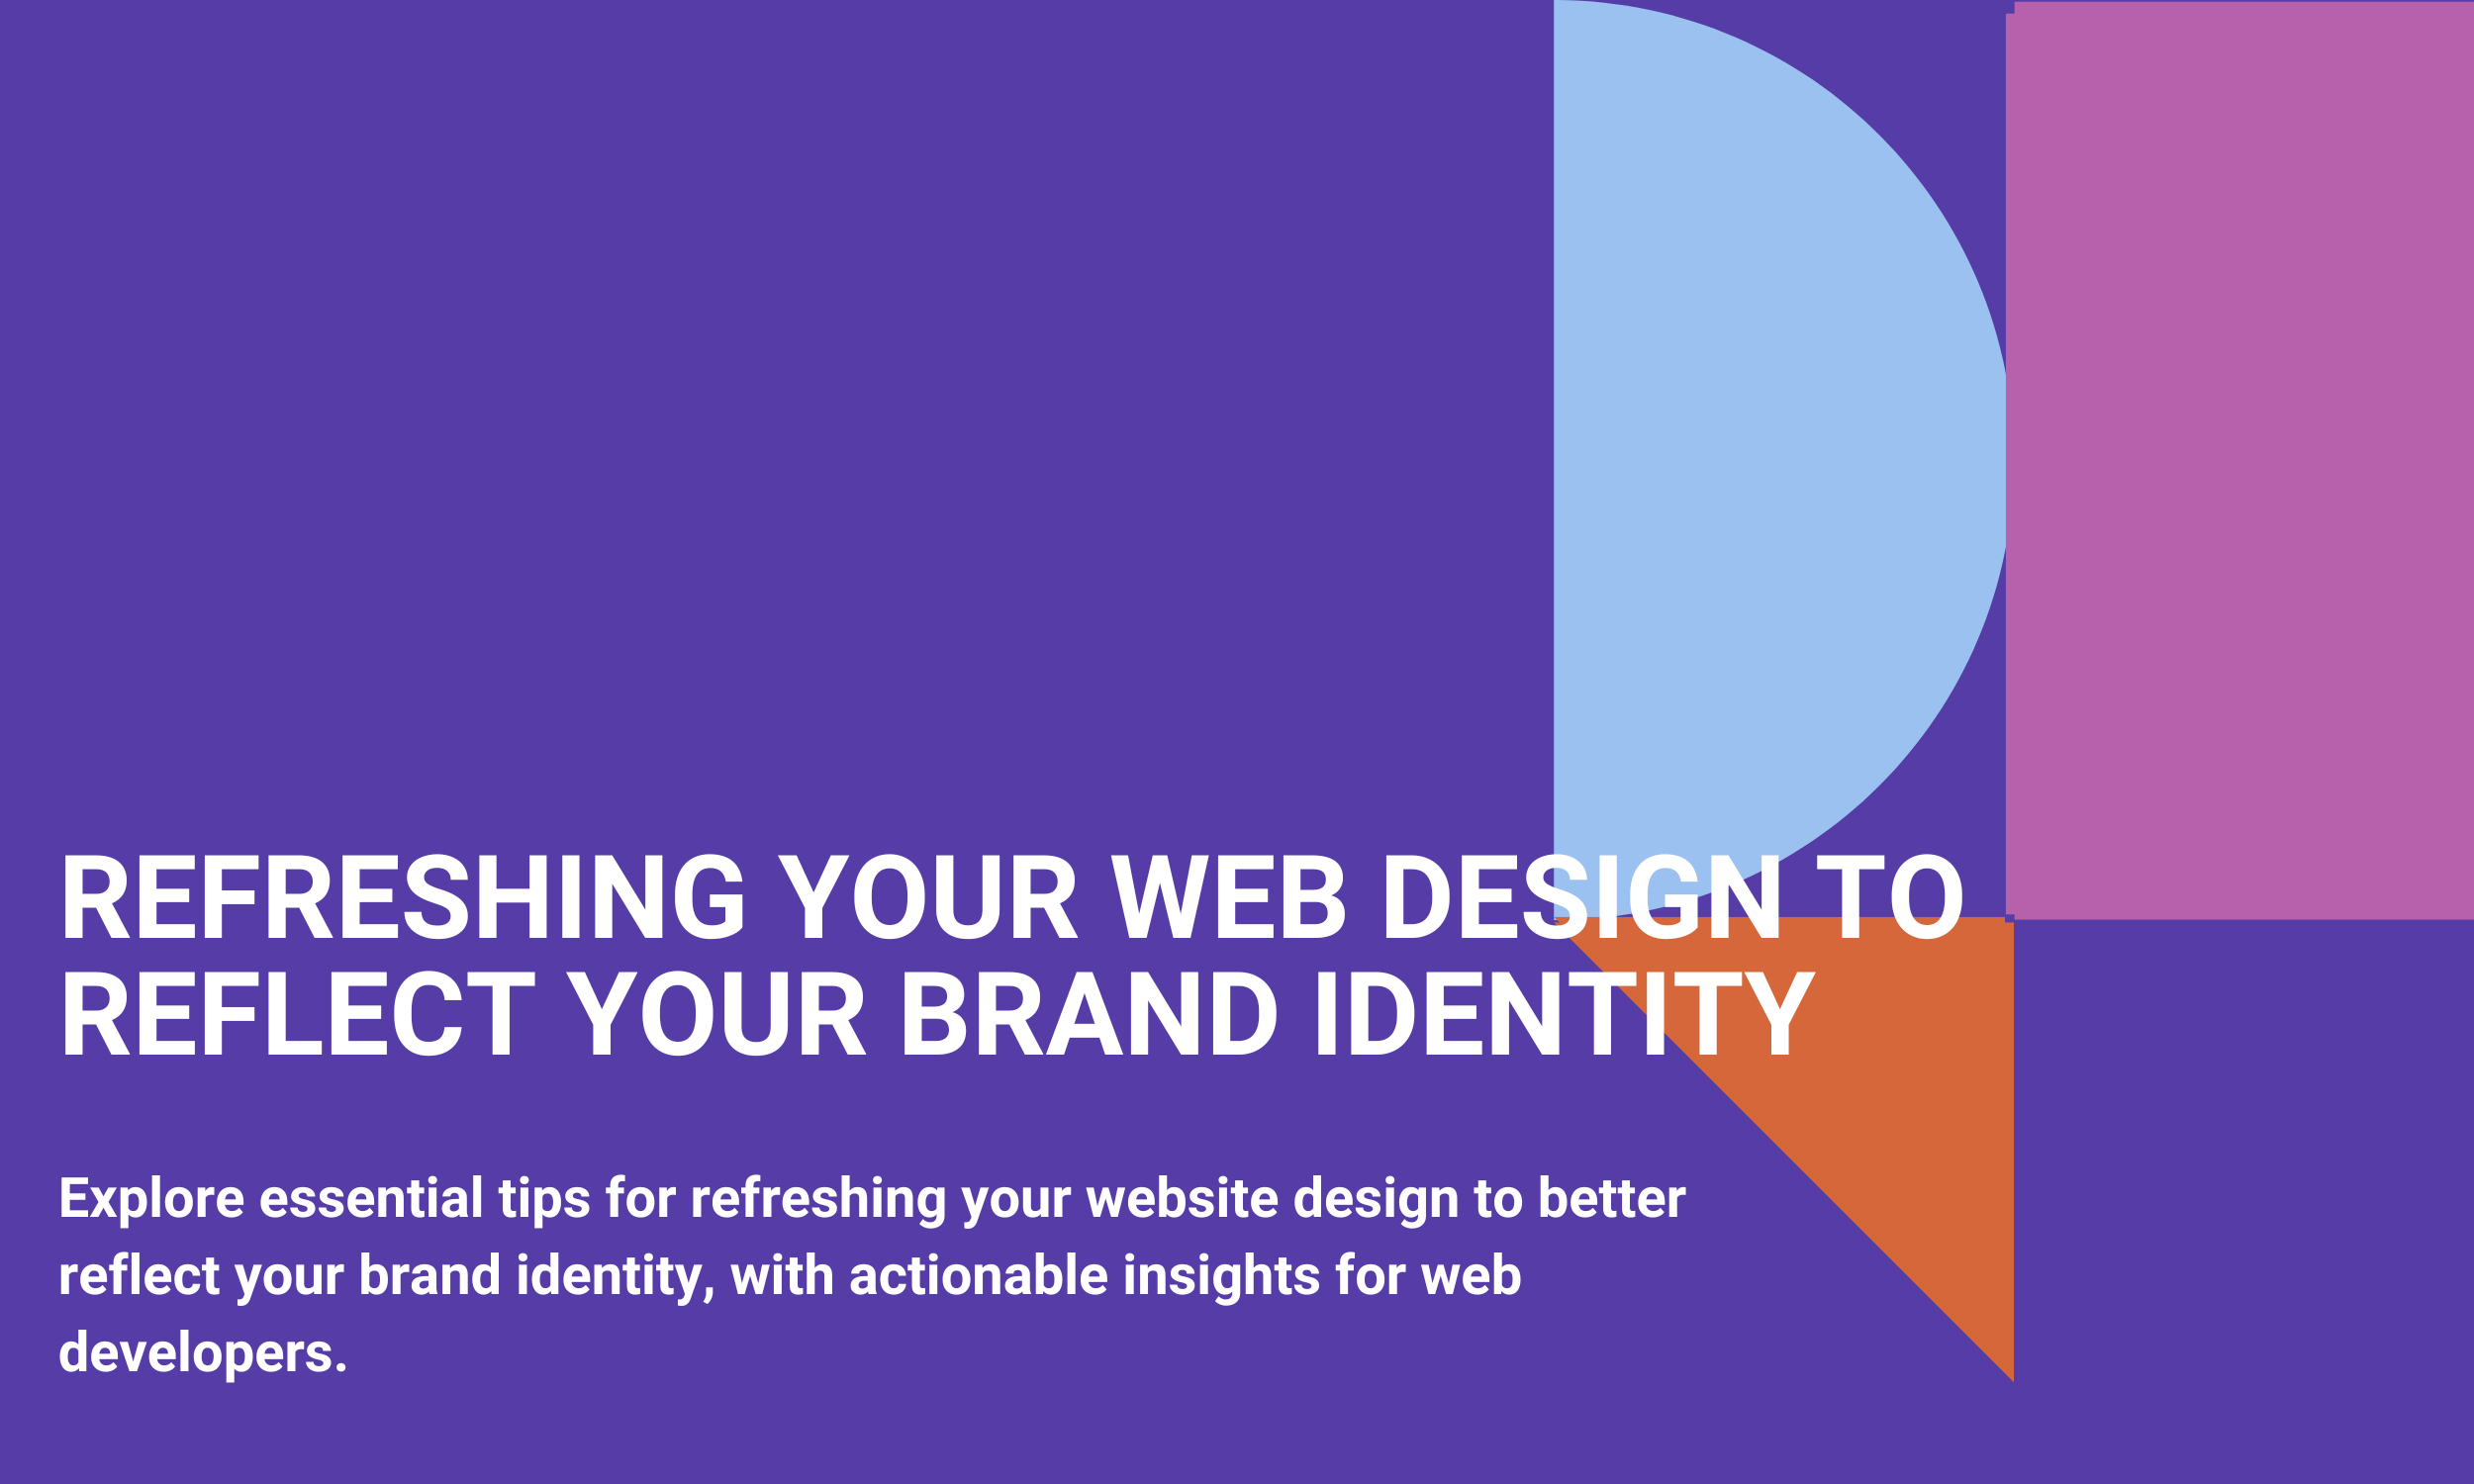 Refreshing Your Web Design to Reflect Your Brand Identity